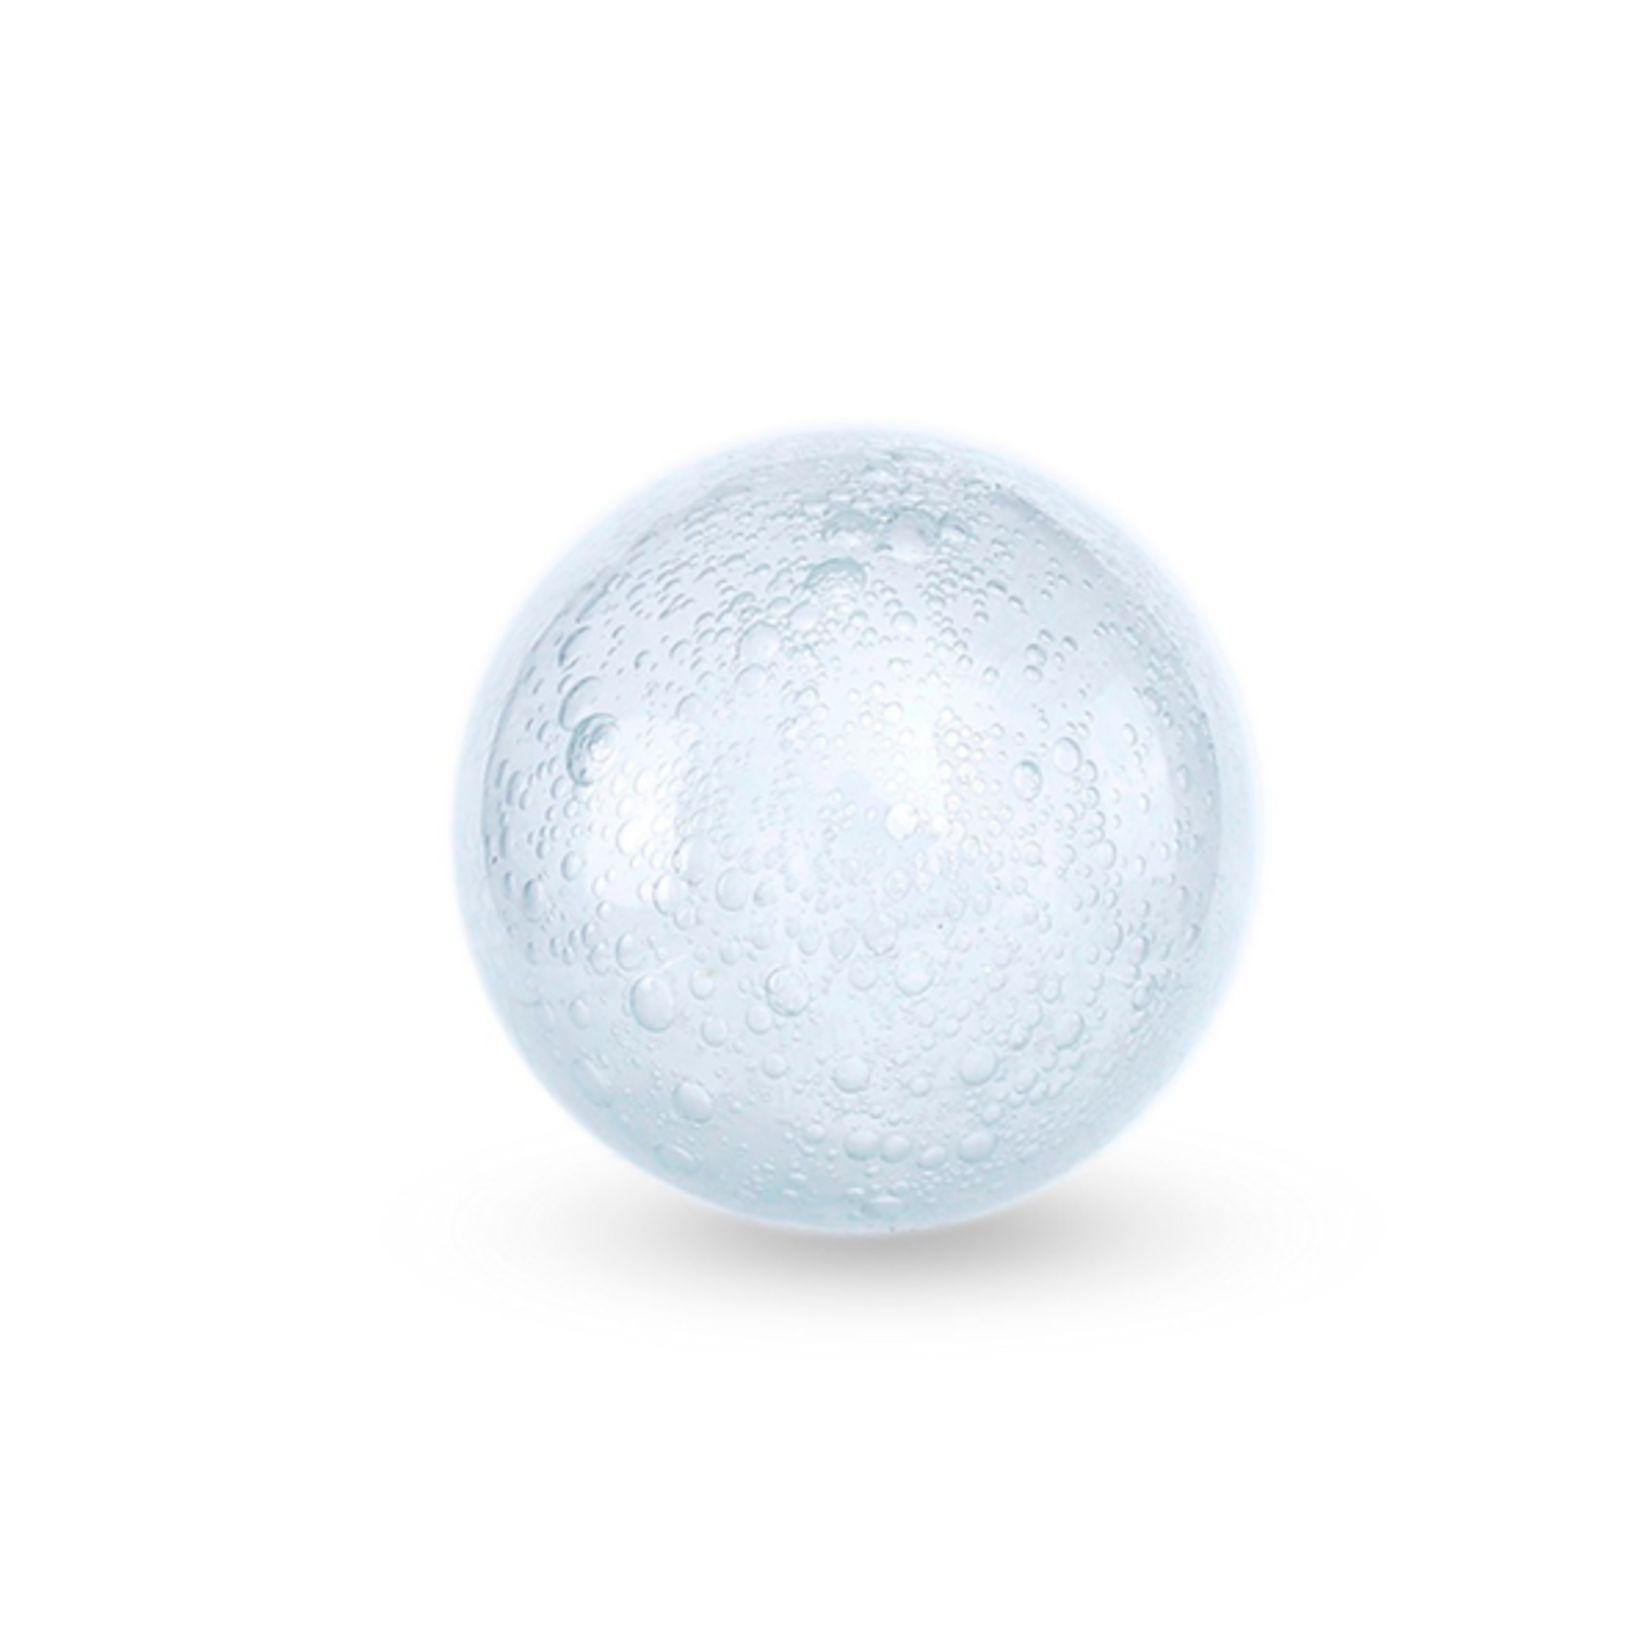 40% off was$8 now $4.79 now 3”D CLEAR DECORATIVE GLASS BALL SPHERE